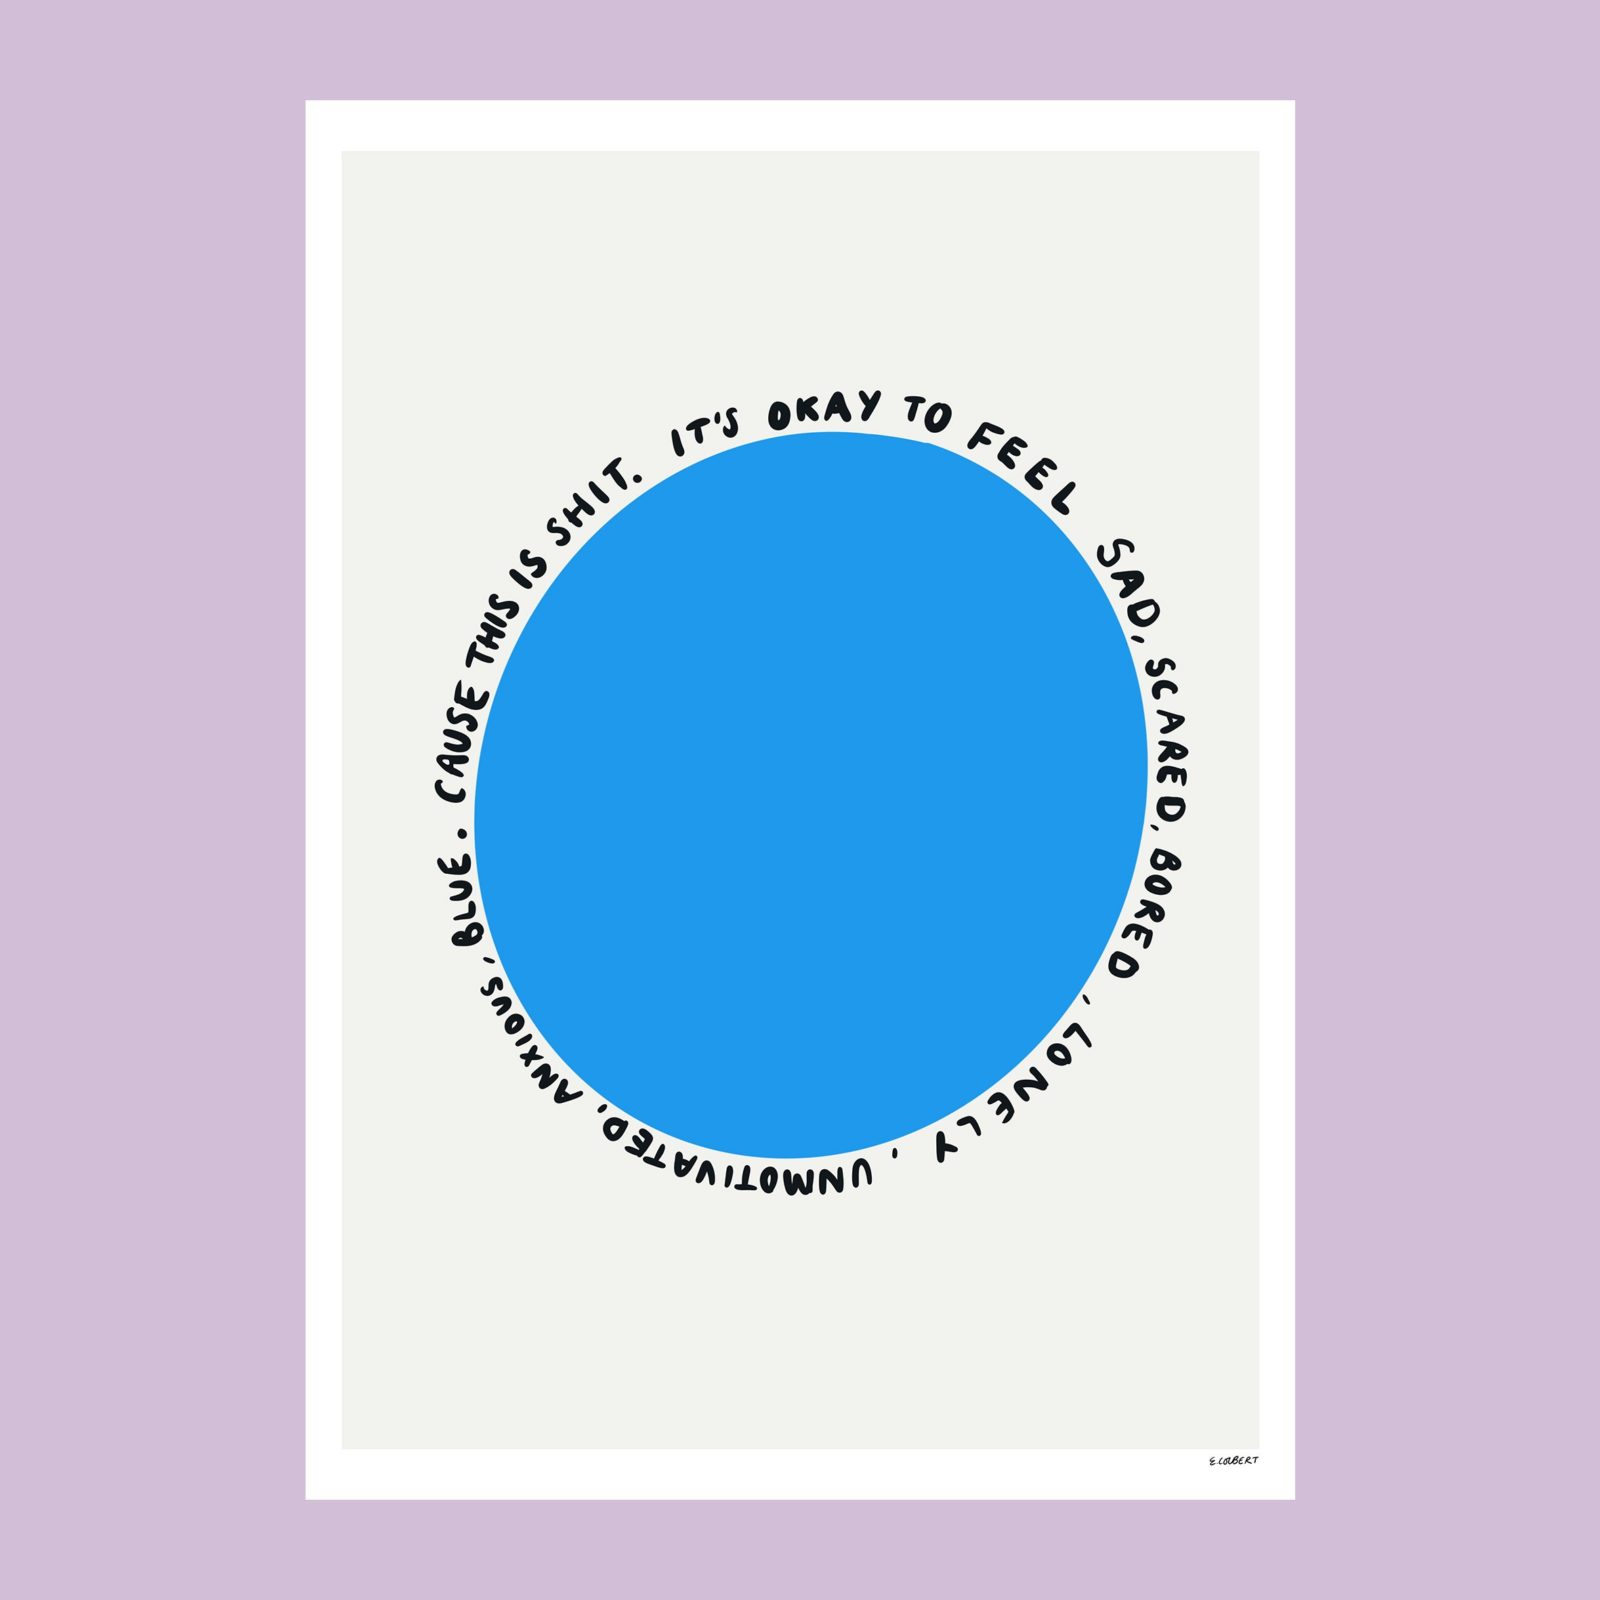 A blue circle sits in the middle of a page. Handwritten words written around the edge of the circle read ' It's okay to feel sad, scared, bored, lonely, unmotivated, anxious, blue. Cause this is shit.'